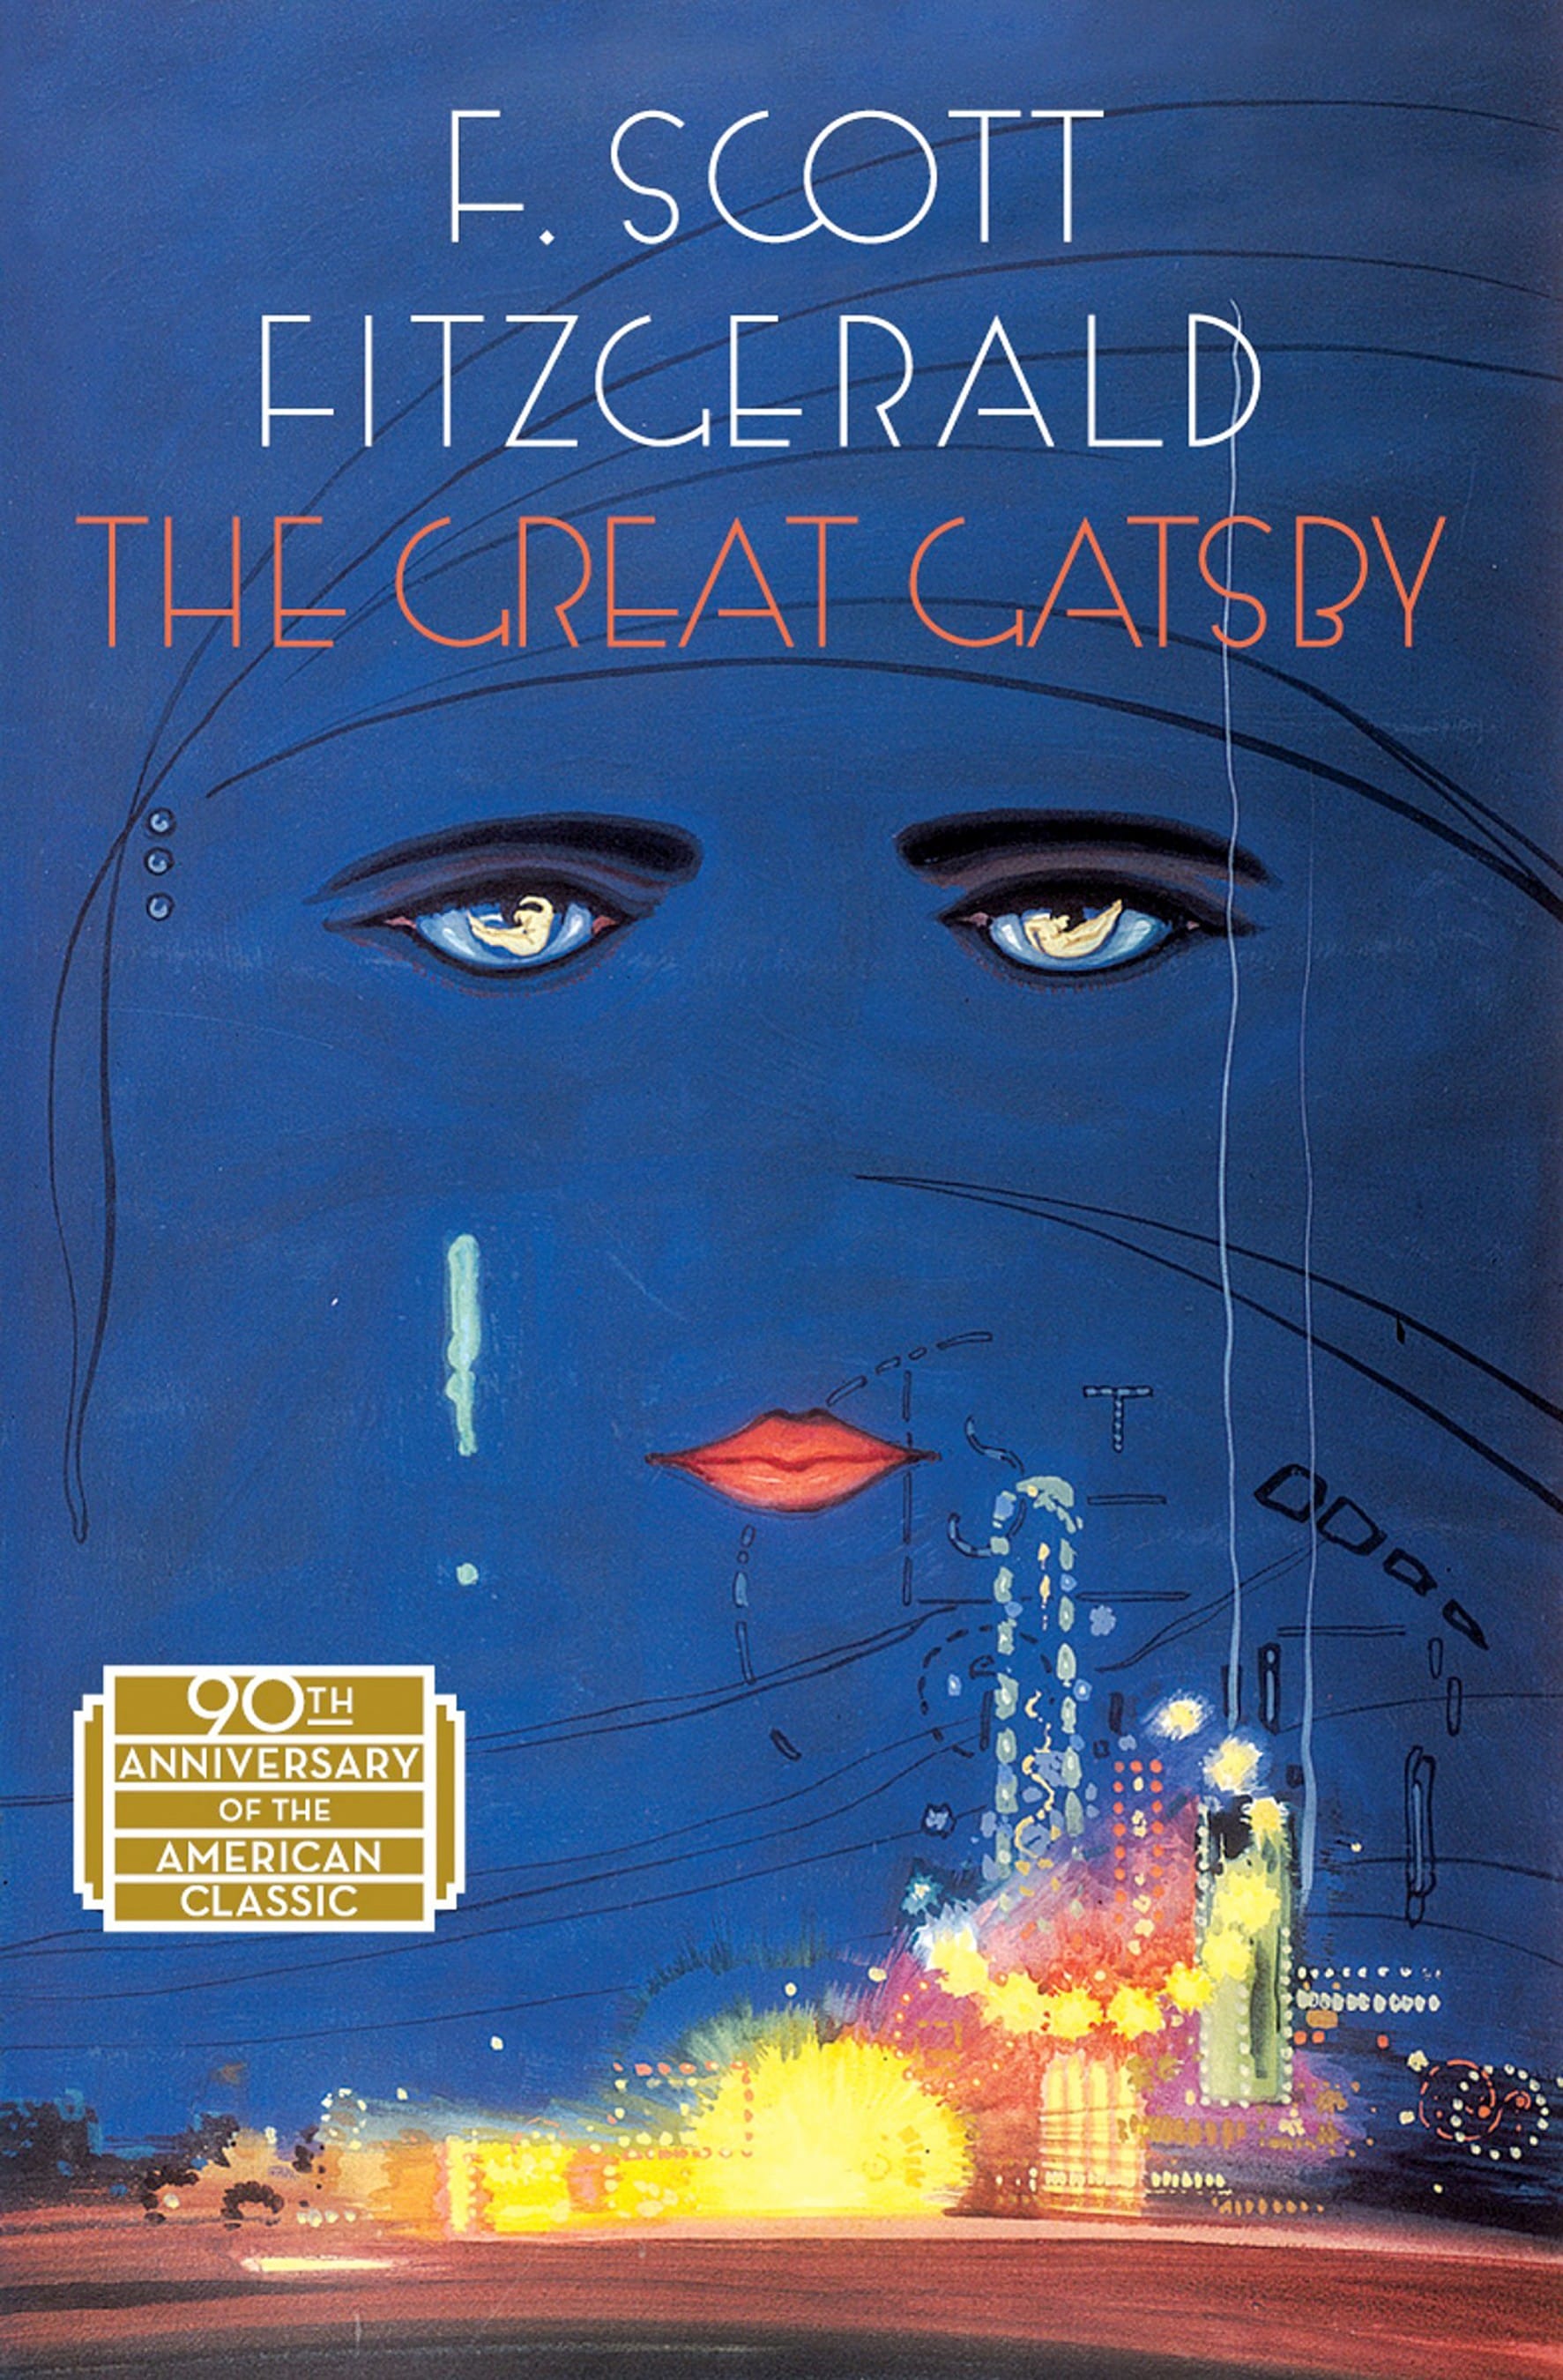 Scribner
Scribner is releasing a commemorative 90th anniversary edition of &quot;The Great Gatsby&quot; with Francis Cugat's famous jacket art.